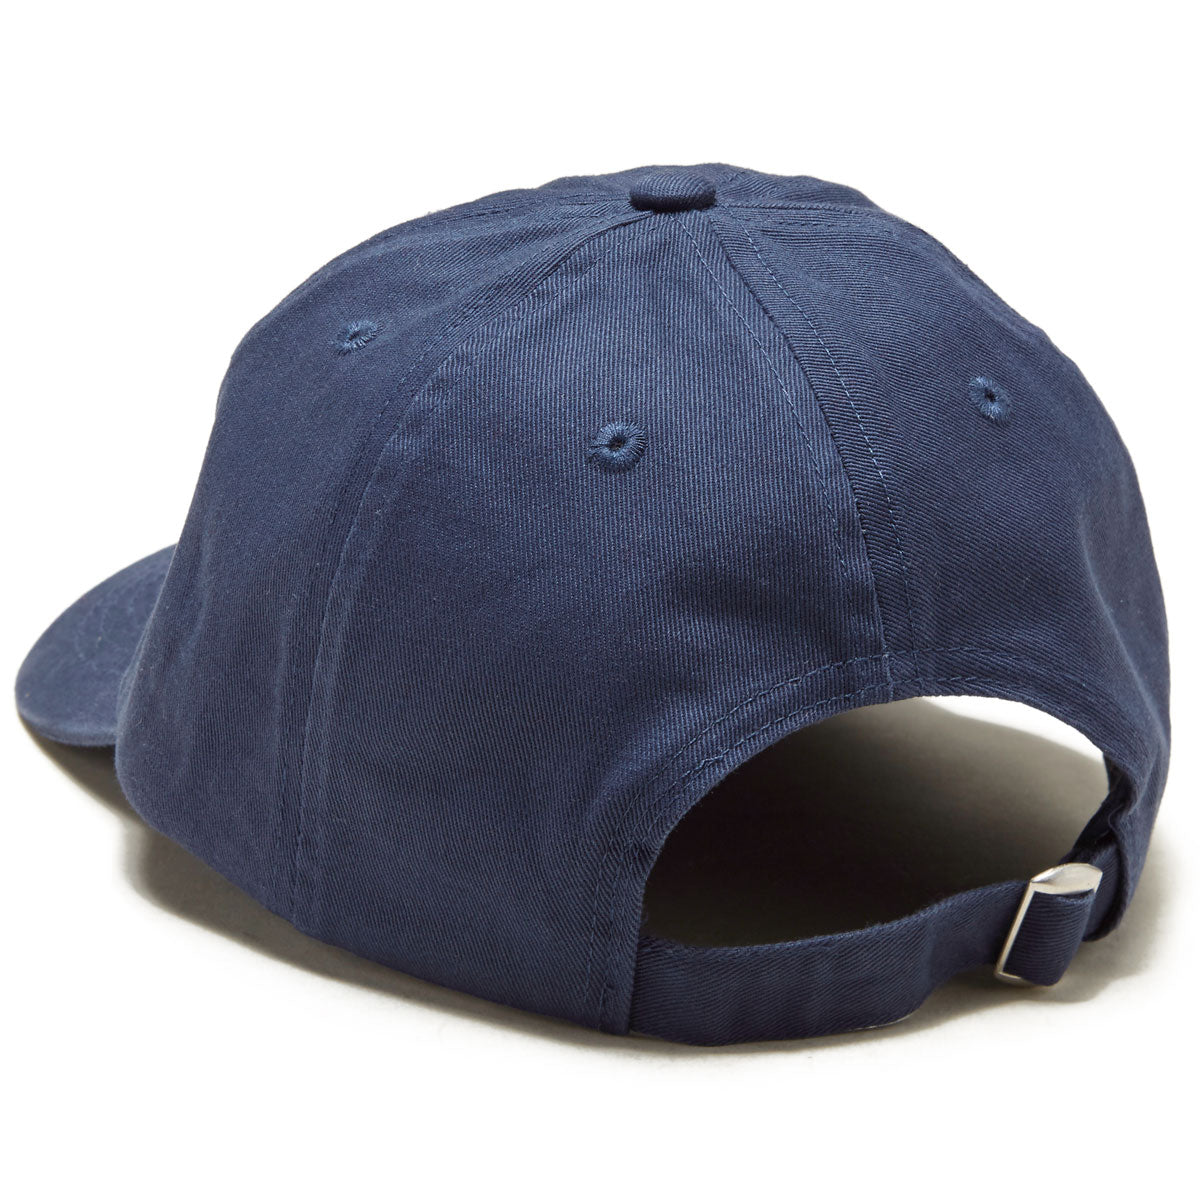 Sour Solution Sci-Fi Hat - Navy image 2